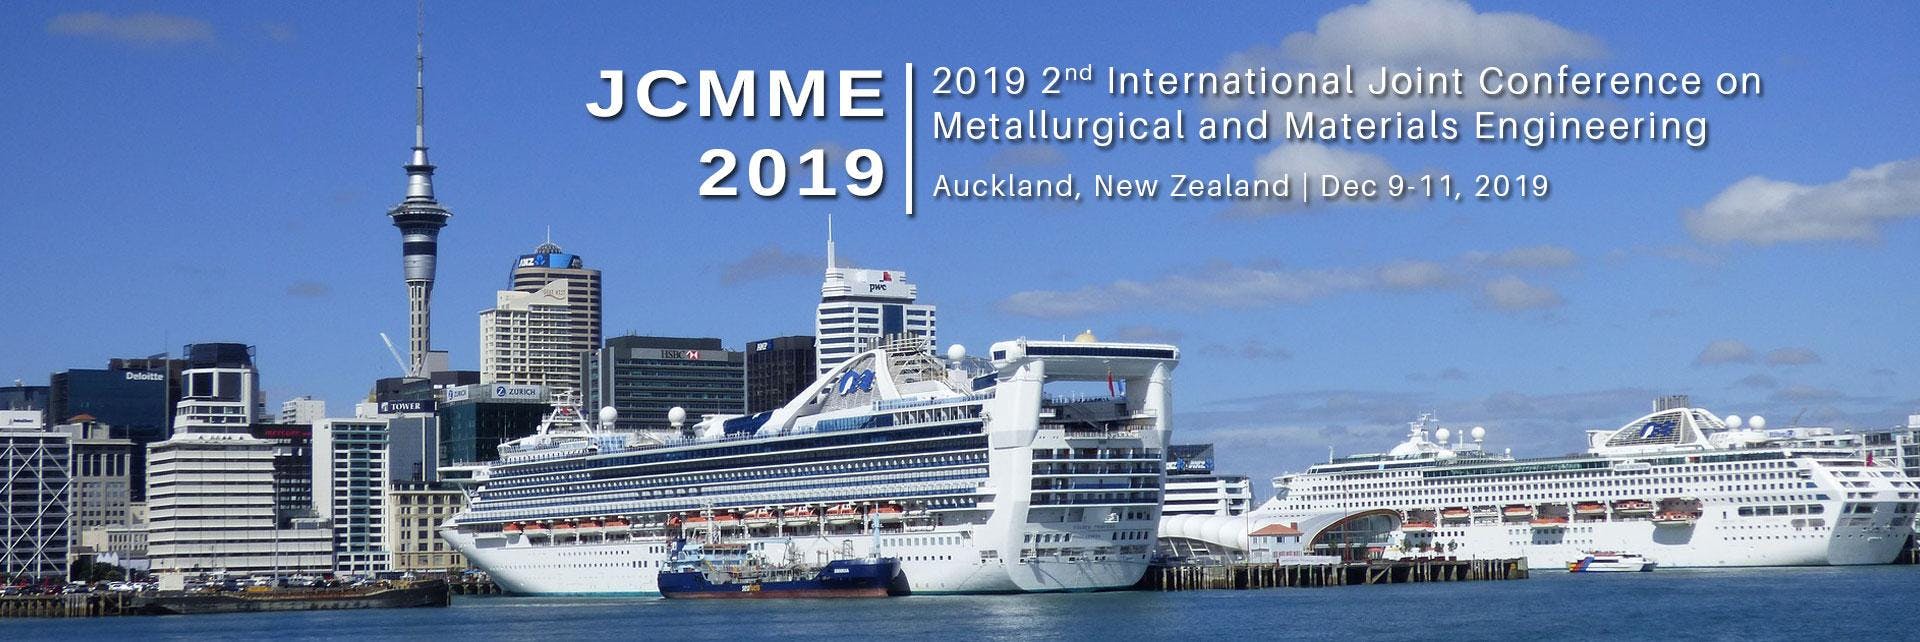 2019 2nd International Joint Conference on Metallurgical and Materials Engineering(JCMME 2019)